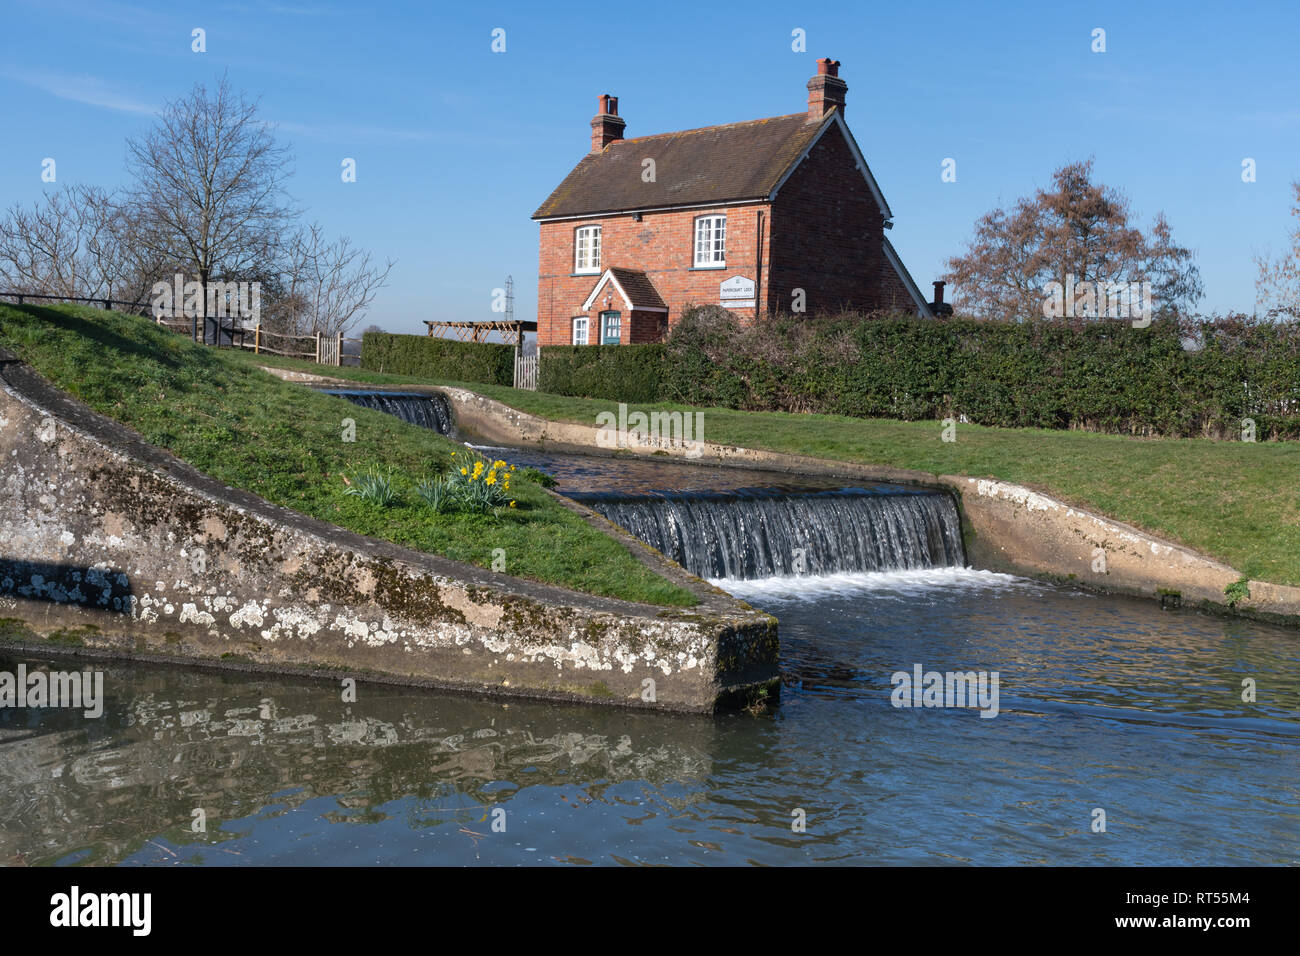 Papercourt Lock and lock keepers cottage on the picturesque River Wey Navigation in Surrey, UK, on a sunny day Stock Photo